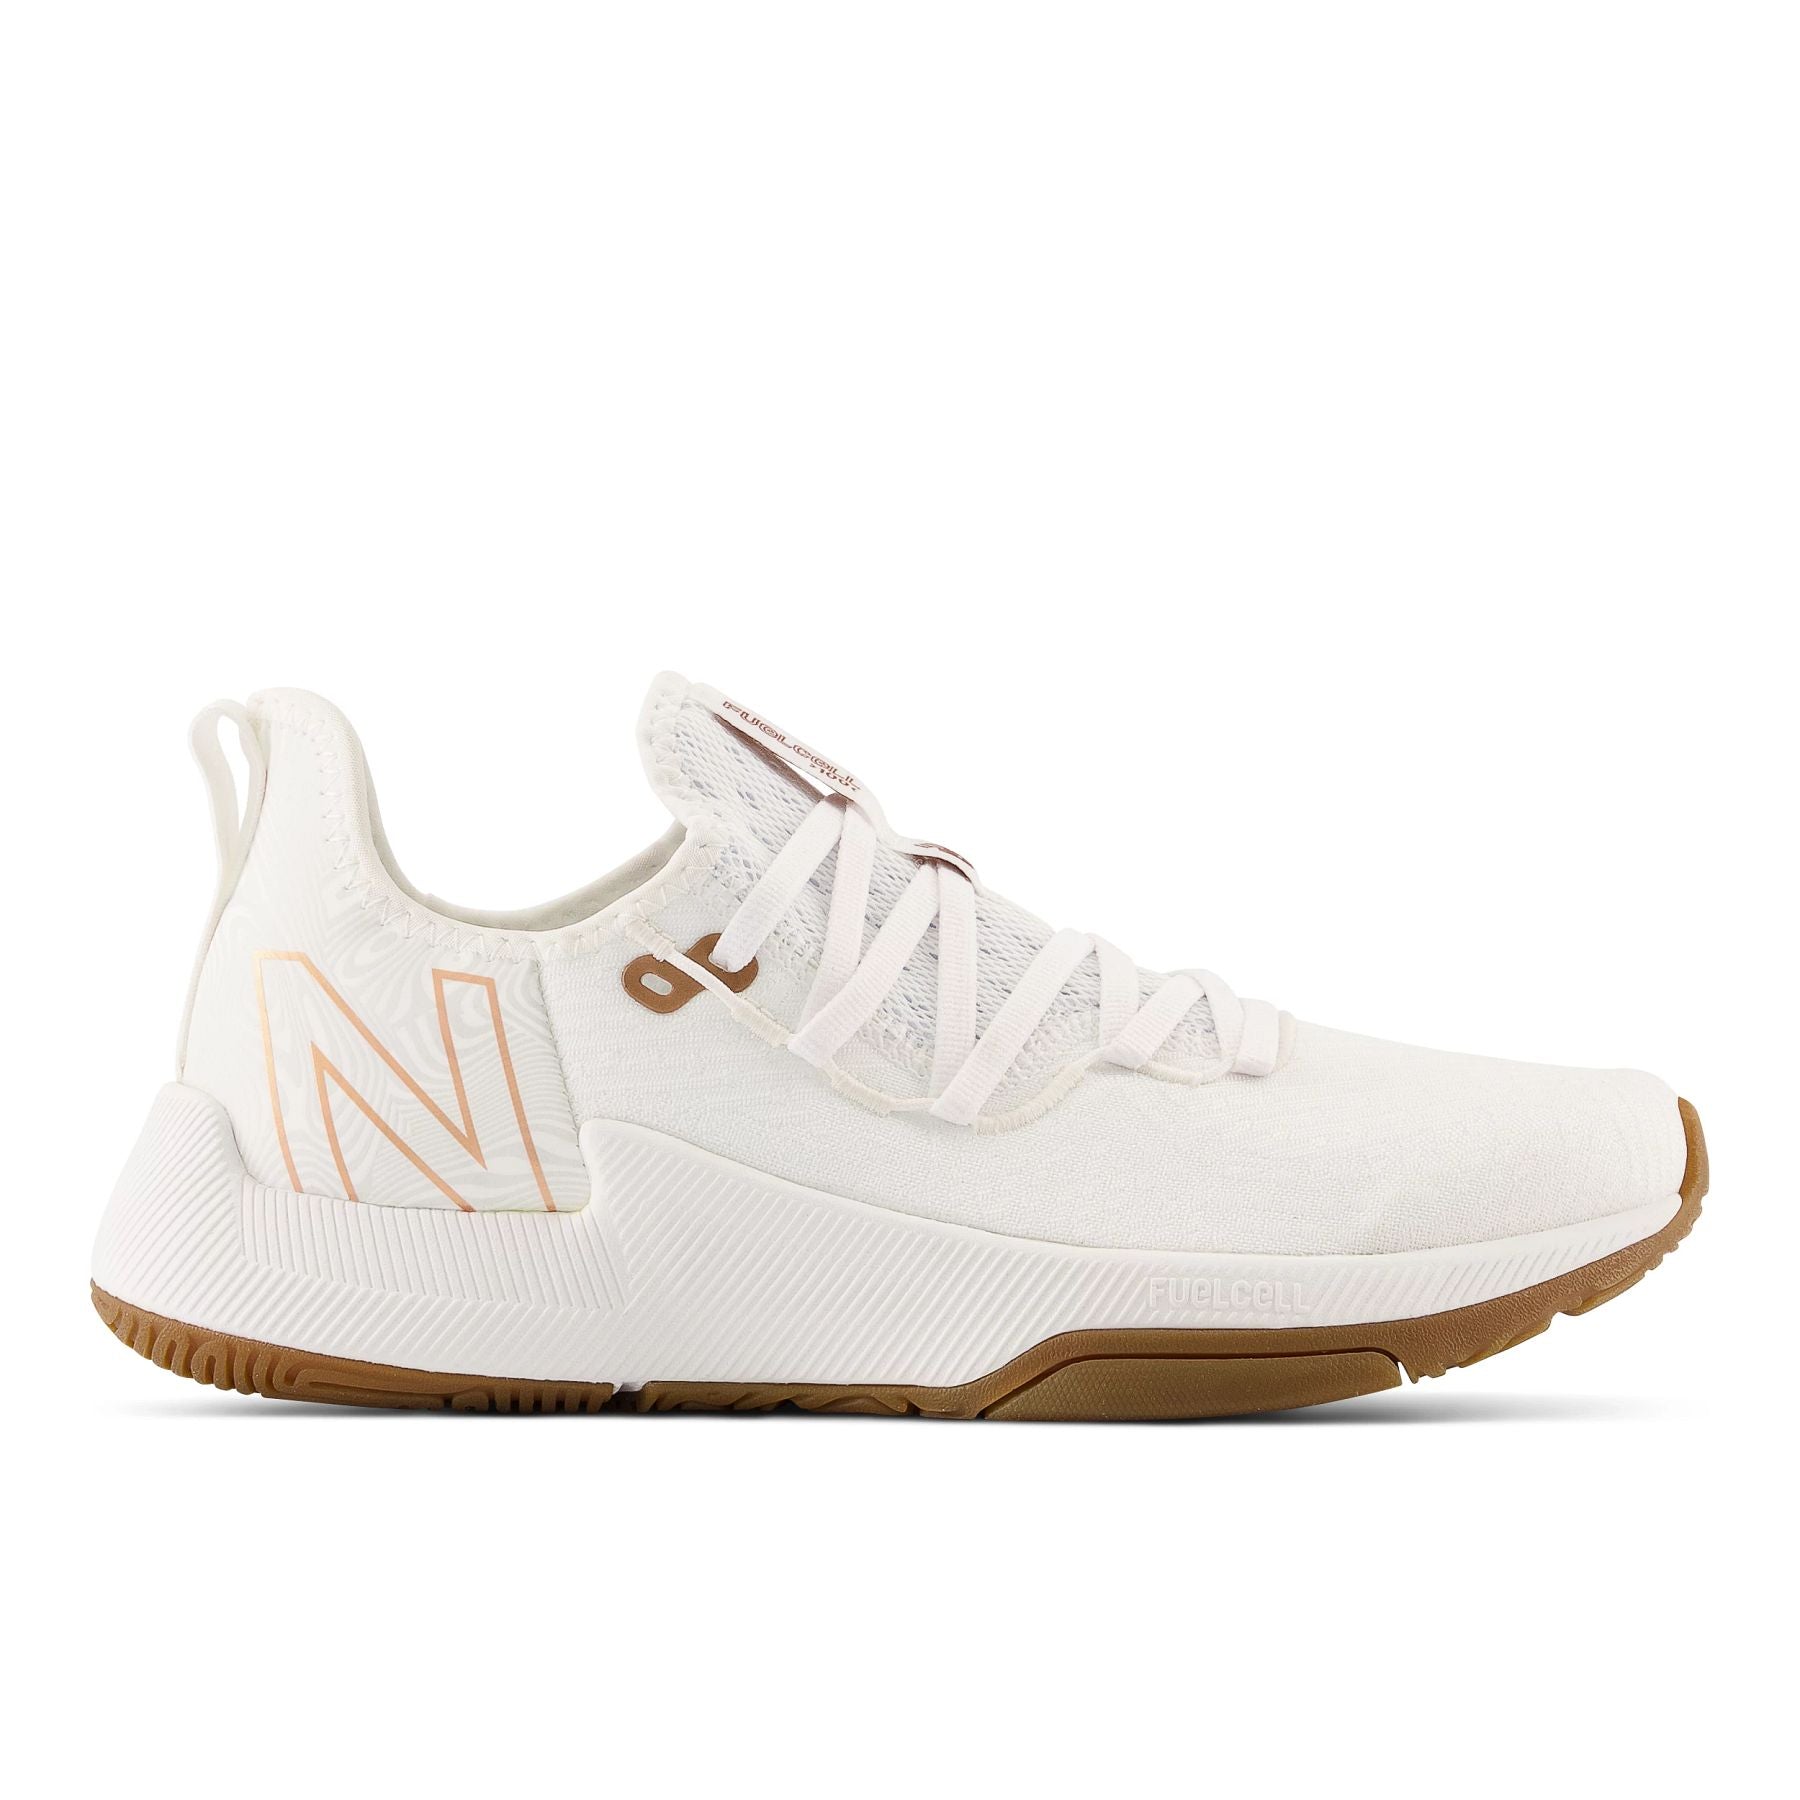 Lateral view of the Women's FuelCell 100 cross trainer by New Balance in the color White/White